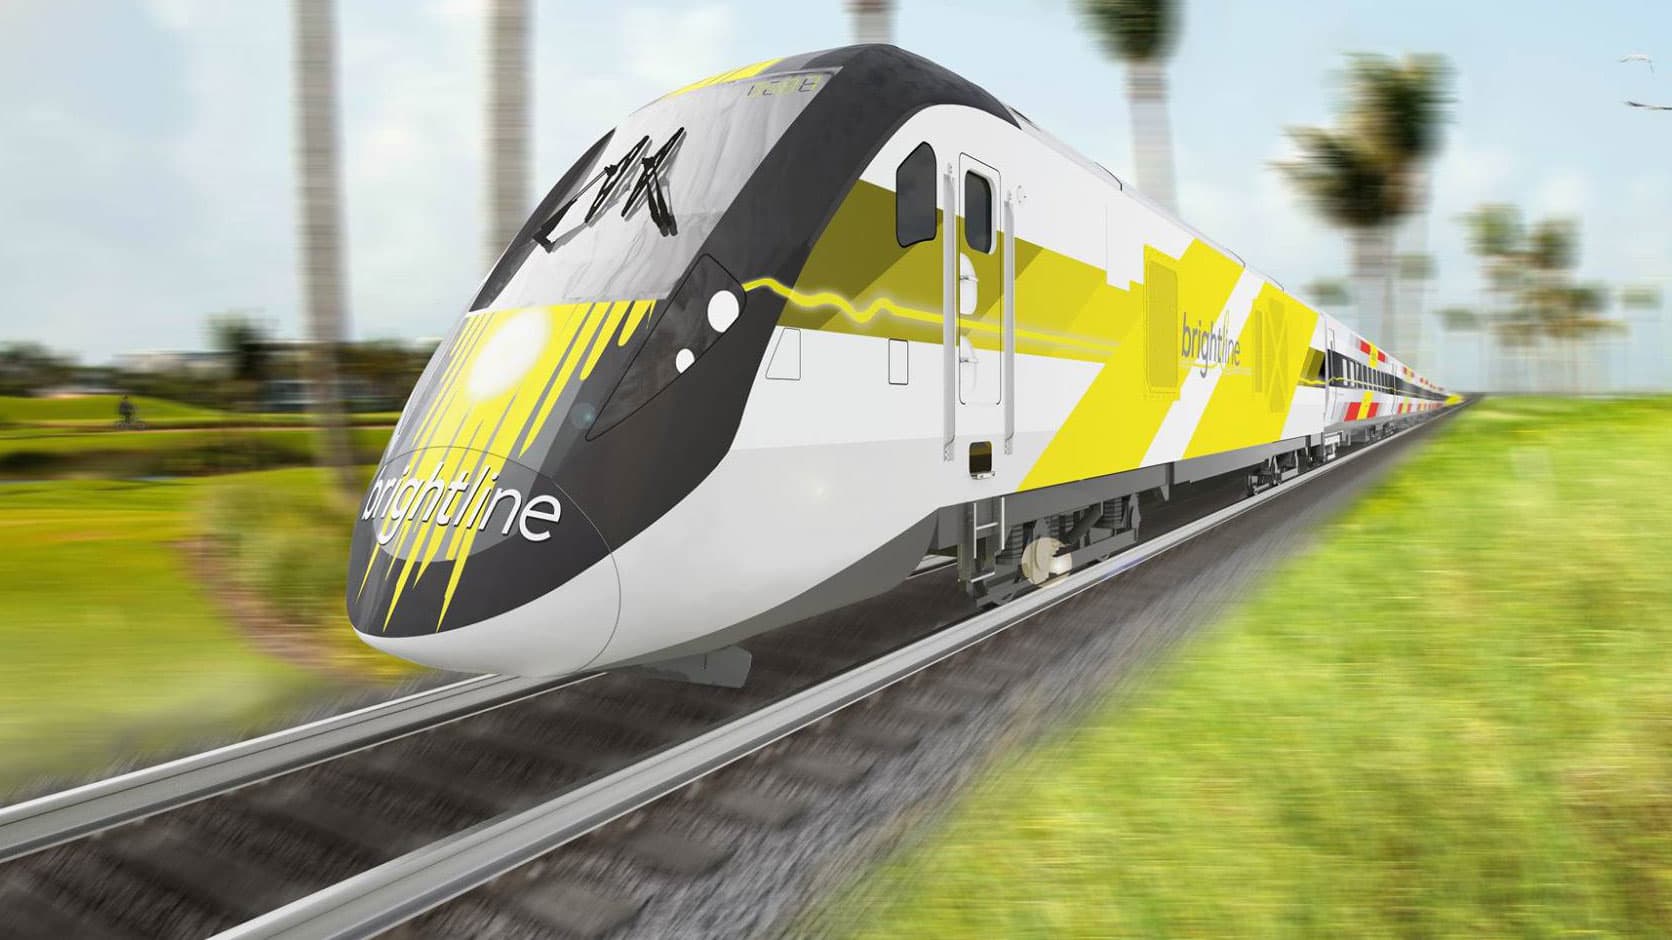 $ billion railway is being built for Florida...in California